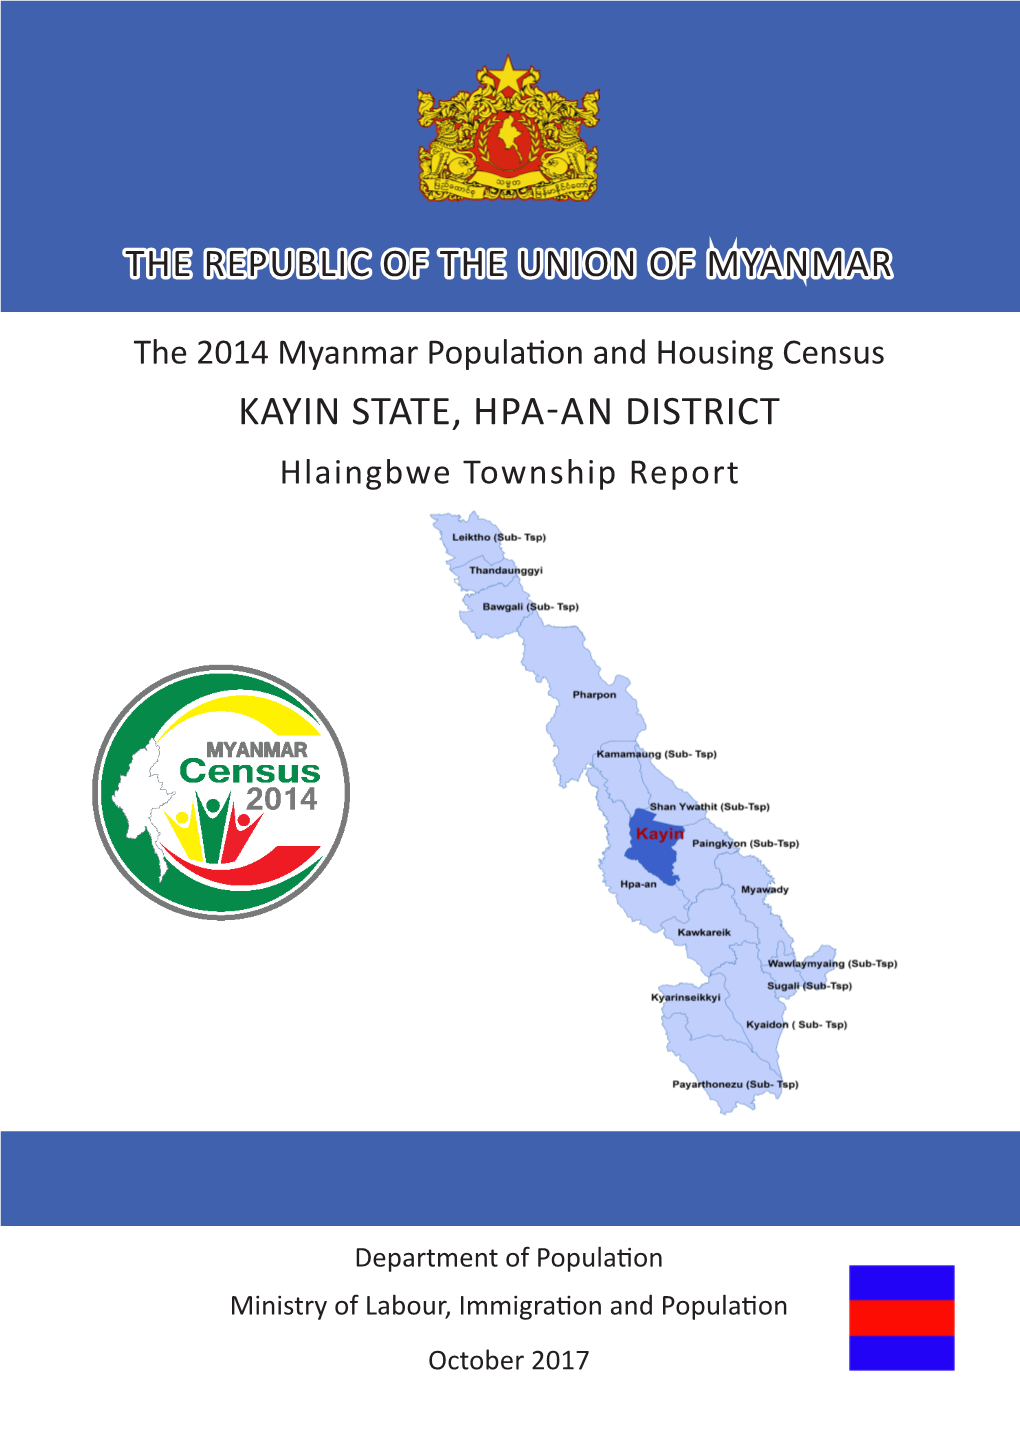 KAYIN STATE, HPA-AN DISTRICT Hlaingbwe Township Report